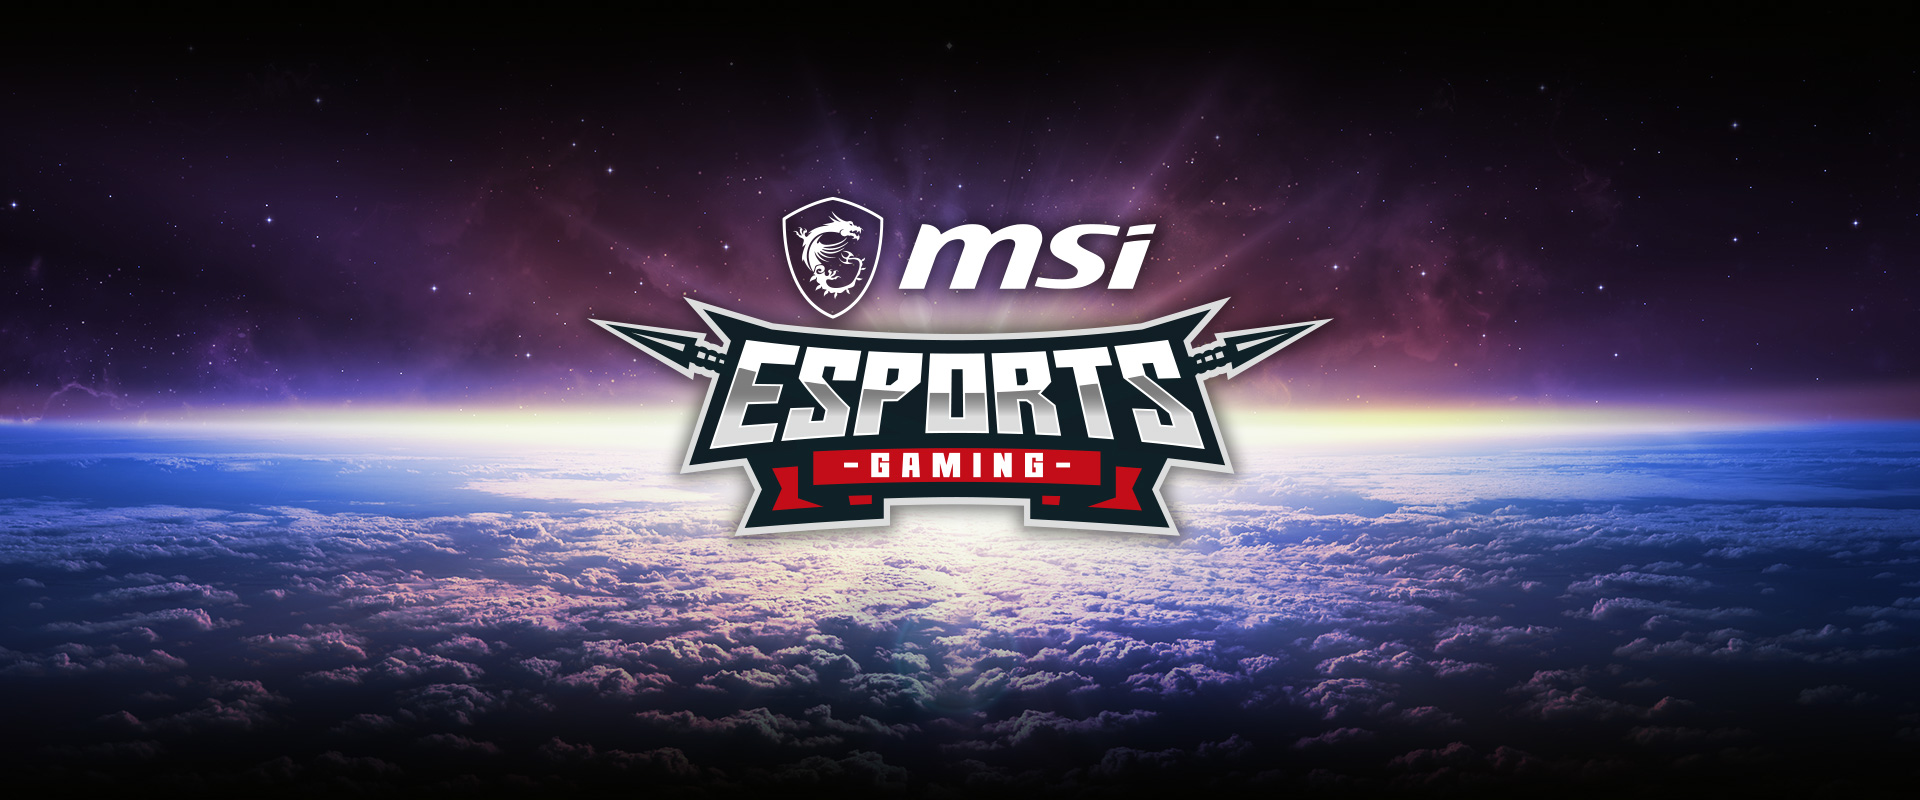 eSports G-SYNC compatible gaming logo in the center of the sky